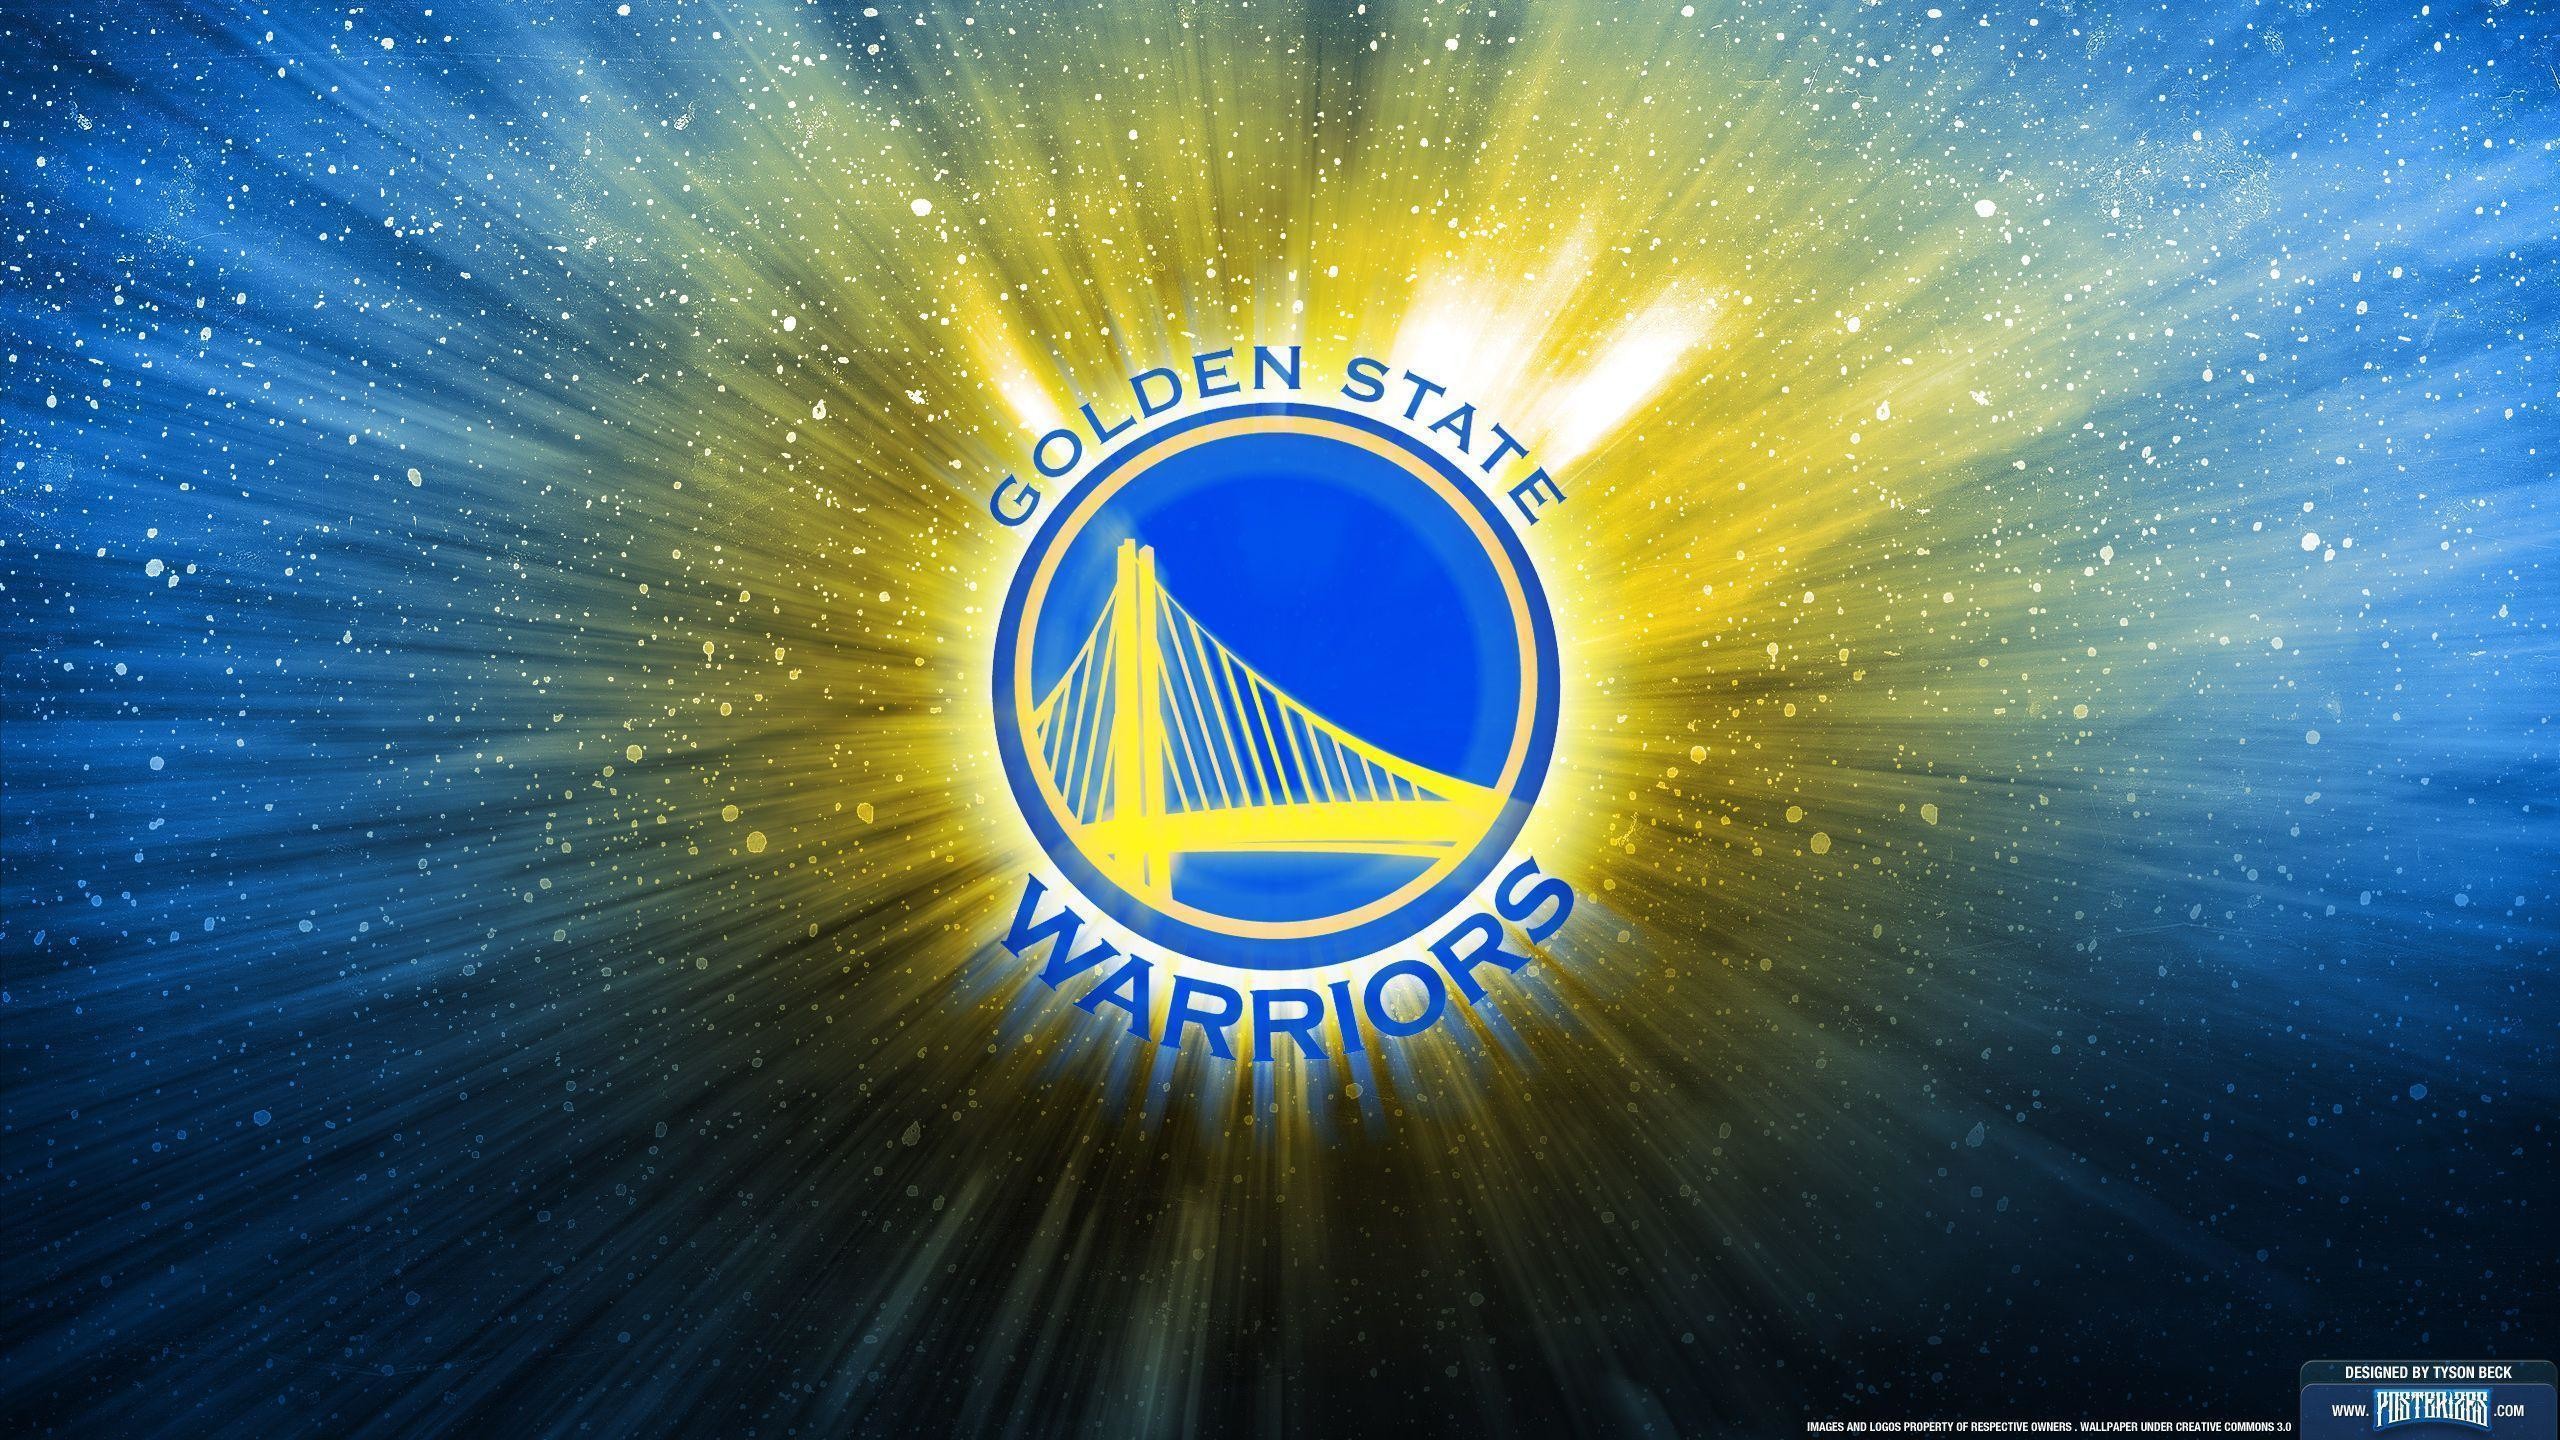 Golden State Warriors Strength In Numbers - Golden State Warriors Background Hd - HD Wallpaper 